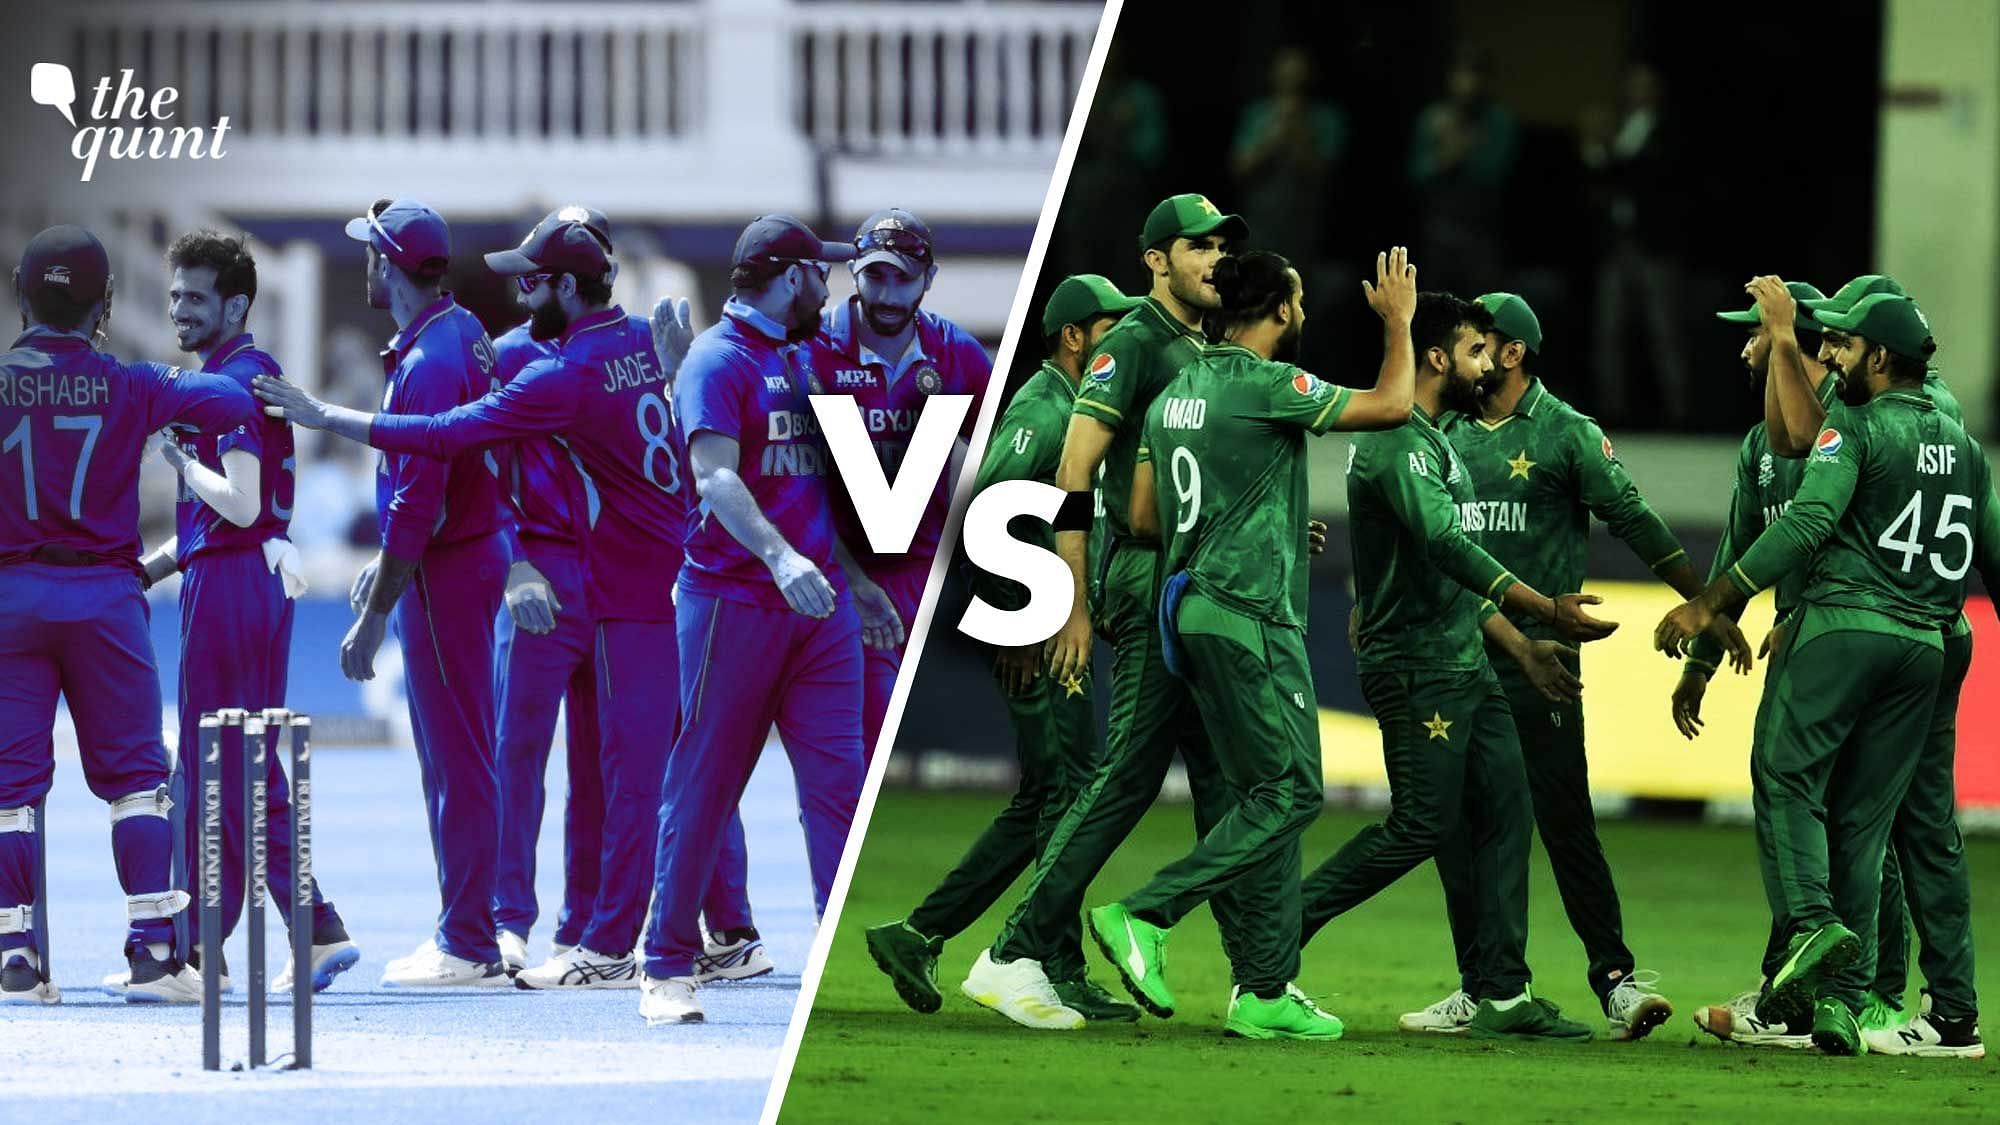 India vs Pakistan Live Score, Asia Cup 2022 IND Vs Pak Live Cricket Match Ind vs Pak Cricket Match Live Updates, India Win By 5 Wickets